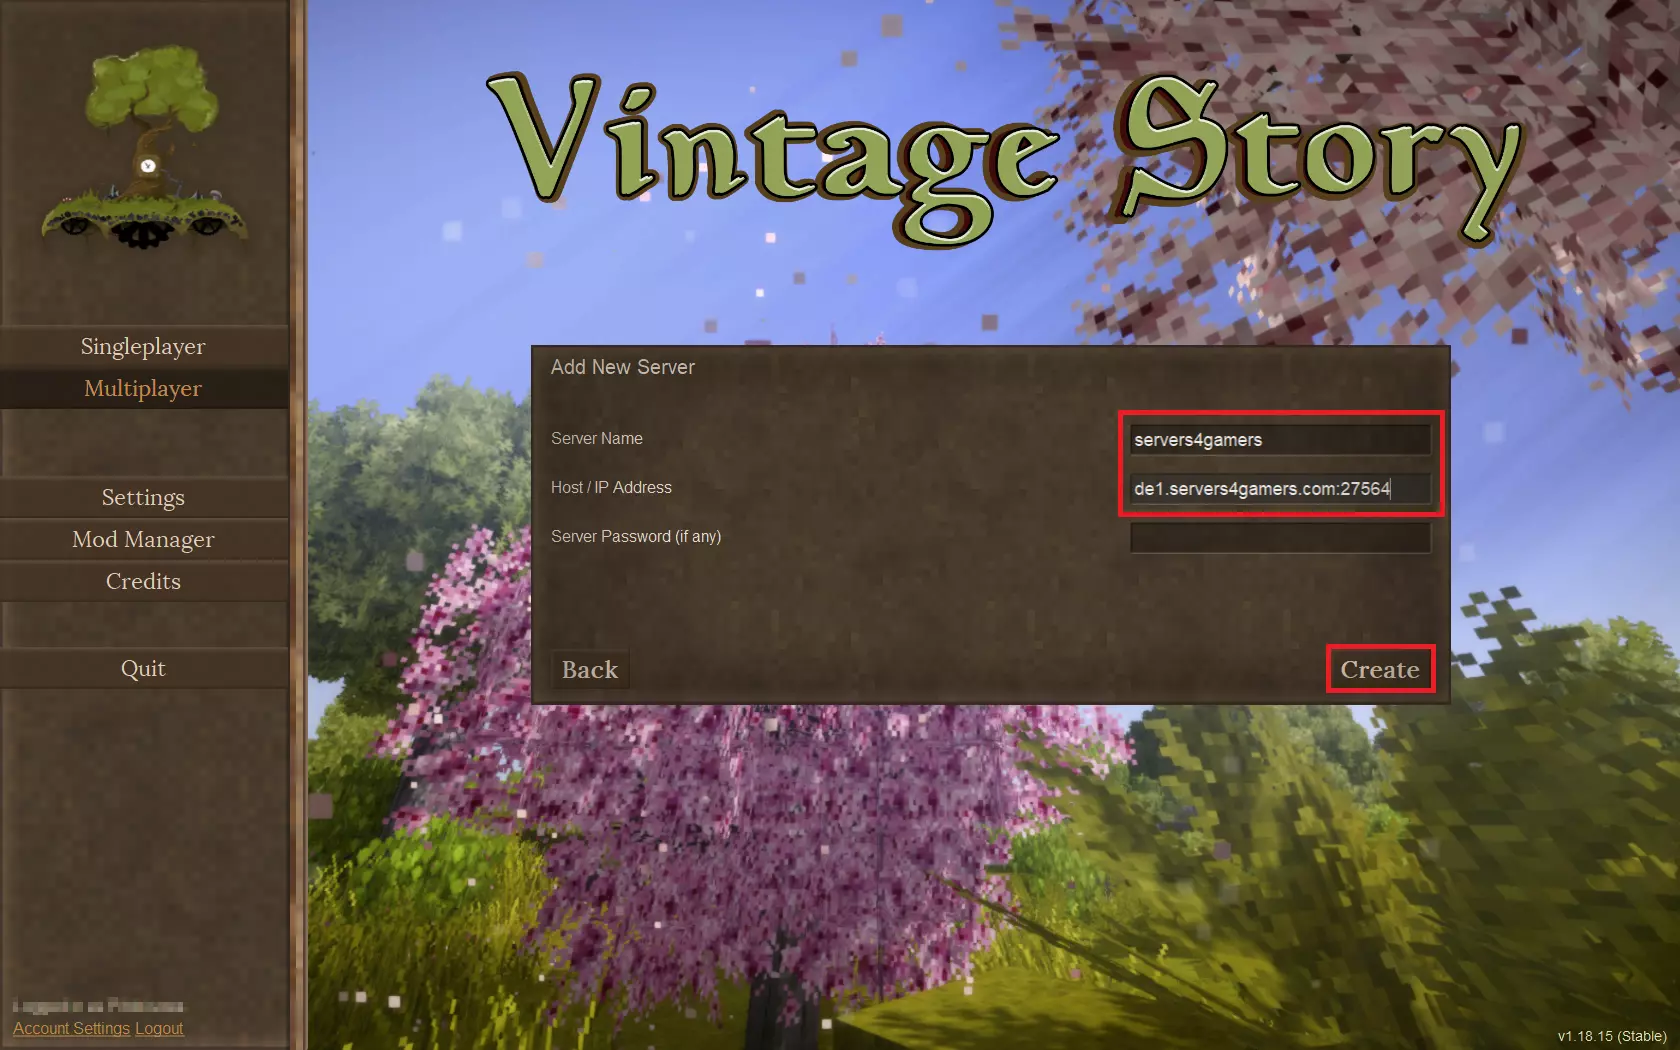 How to connect Vintage Story 3